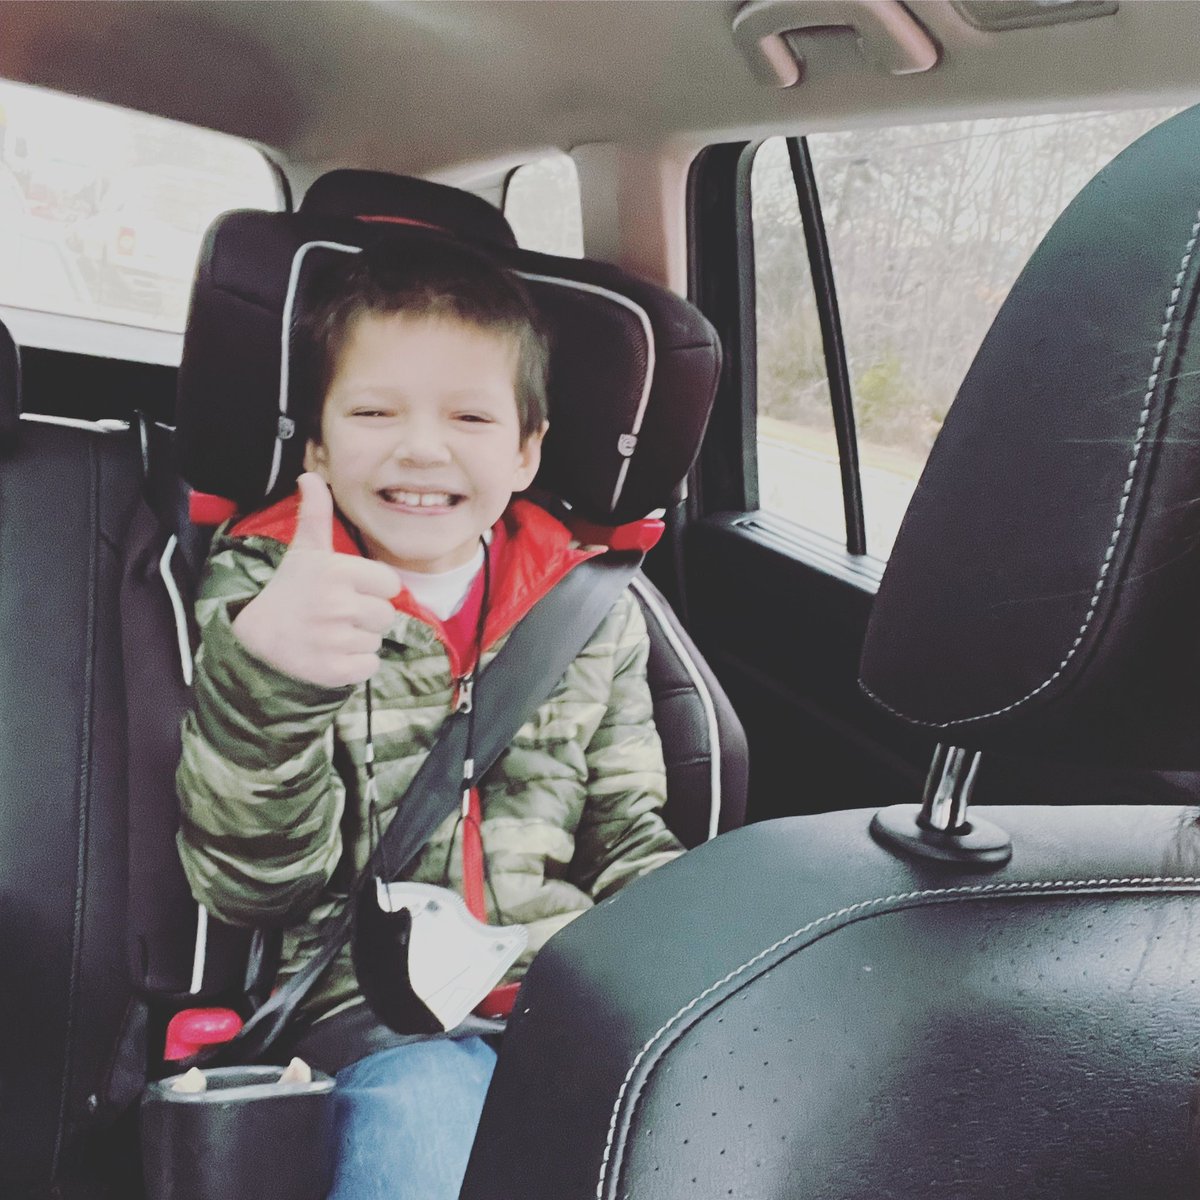 Celebration 🎉 🎉🎉
In the #raredisease community and #globaldevelopmentaldelay community, we celebrate inchstones! Today, Charlie successfully snapped and zipped his jeans all by himself! Progress which enhances independence is such an incredible gift! #smithkingsmoresyndrome